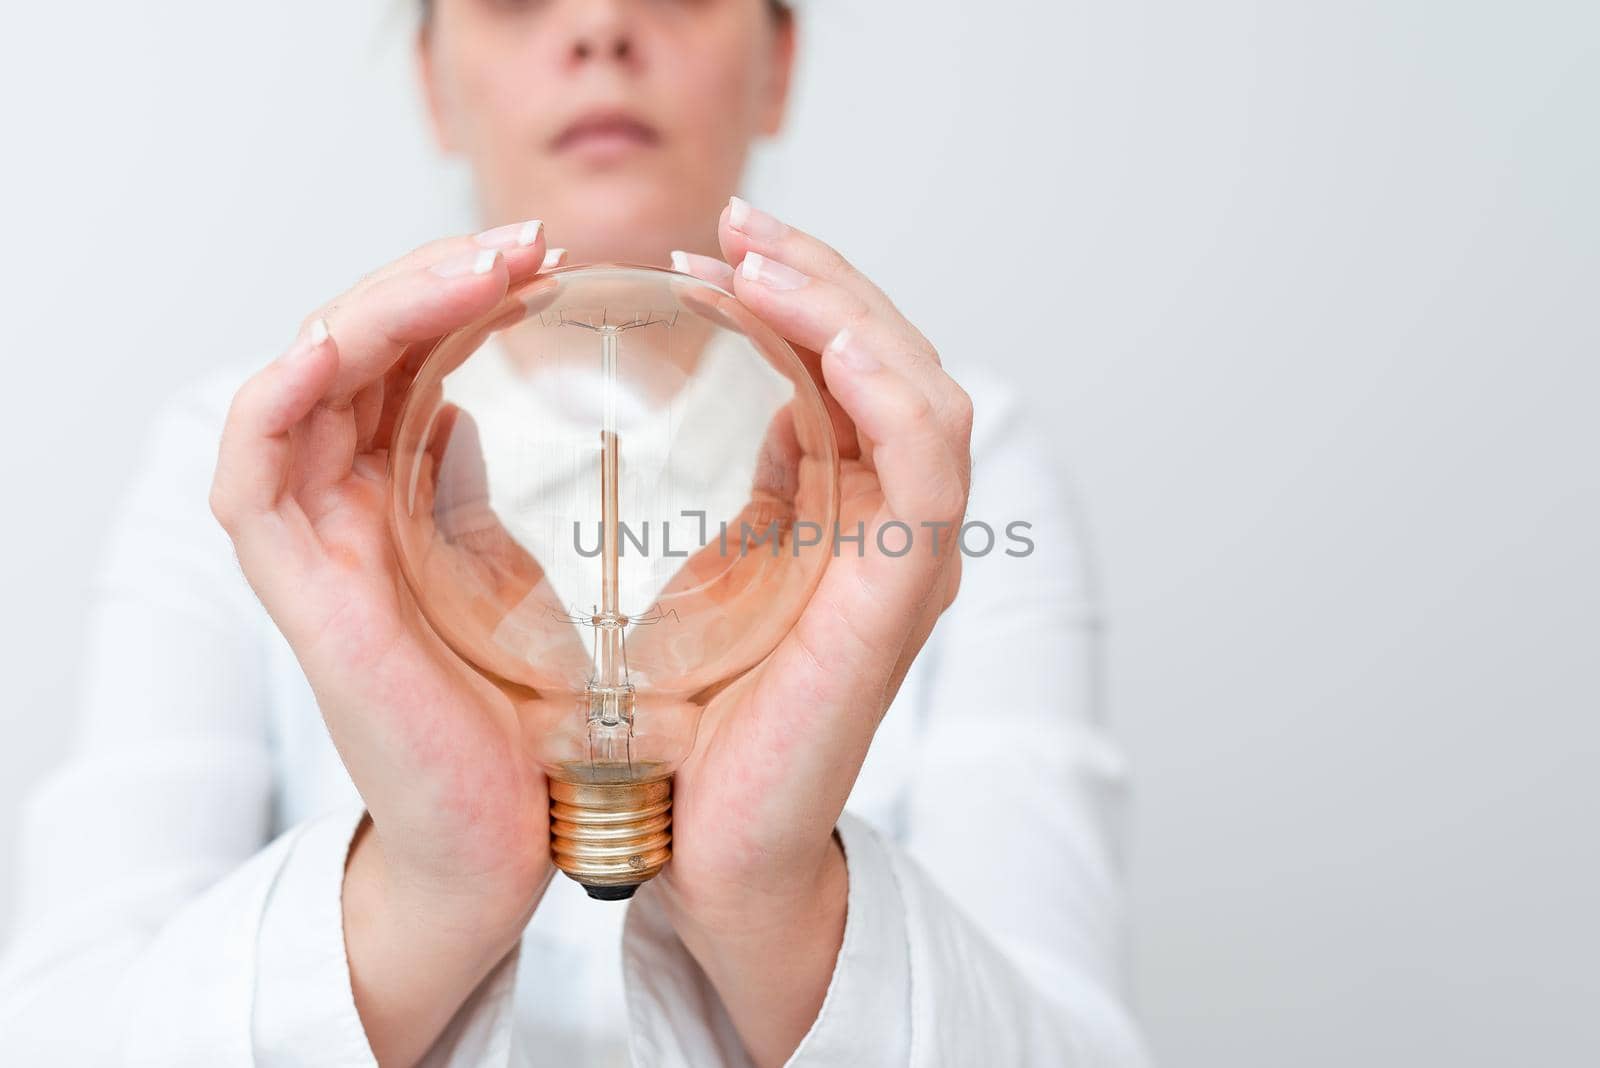 Lady Holding Lamp With Formal Outfit Presenting New Ideas For Project, Business Woman Showing Bulb With Two Hands Exhibiting New Technologies, Lightbulb Presenting Another Openion by nialowwa